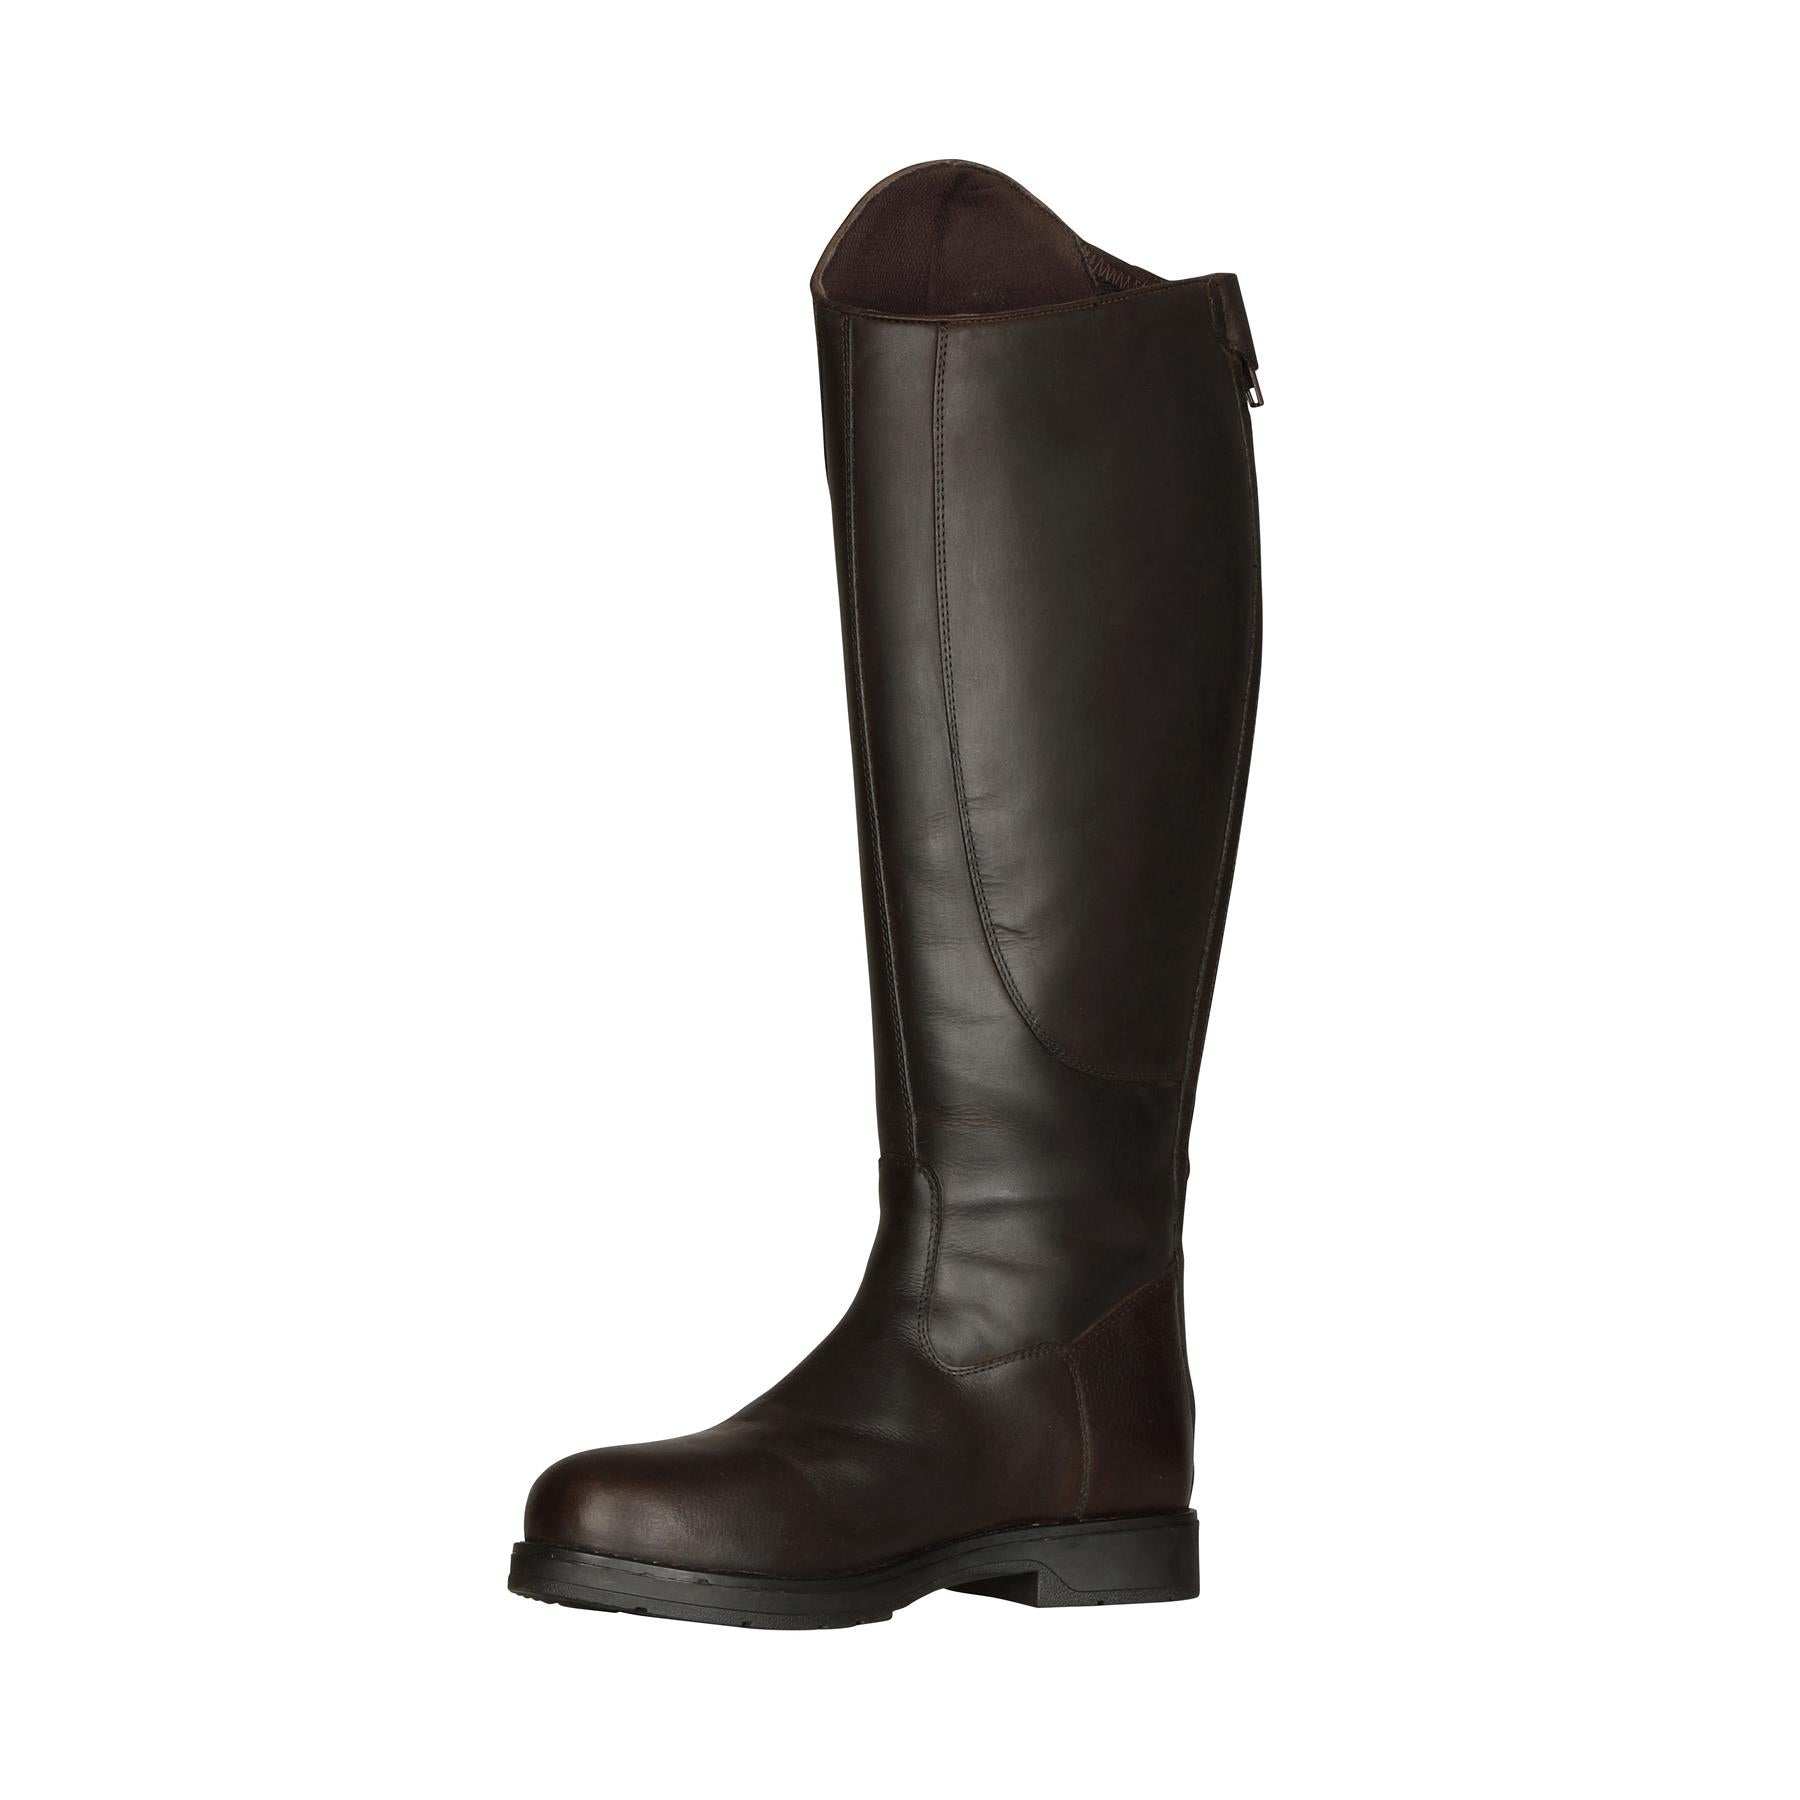 Shires Moretta Ventura Lite Riding Boots-Childs - Just Horse Riders